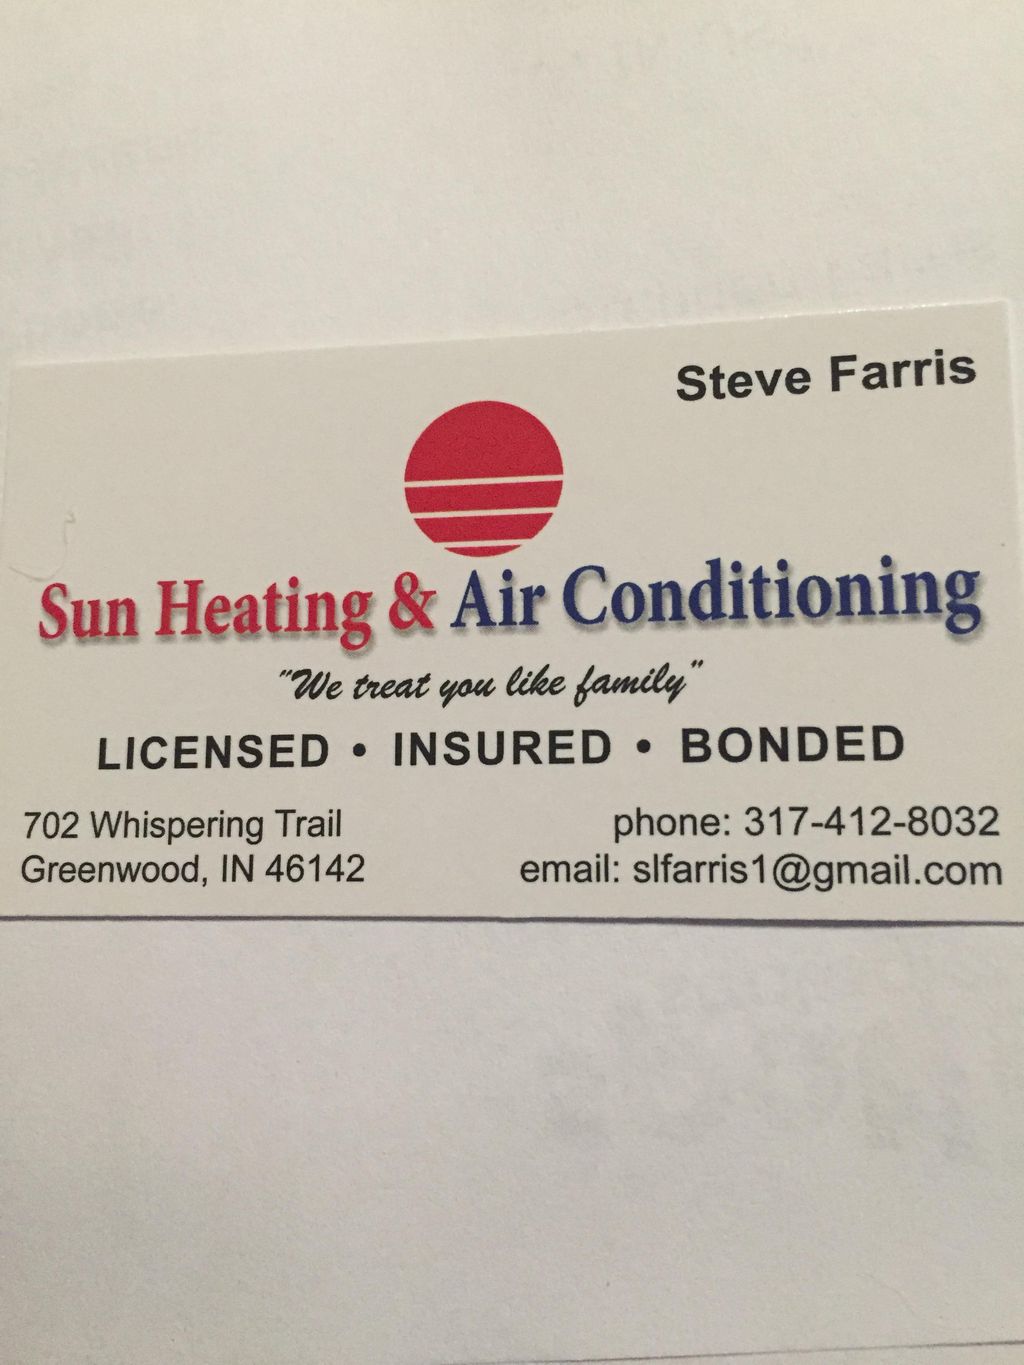 Sun Heating & Air Conditioning